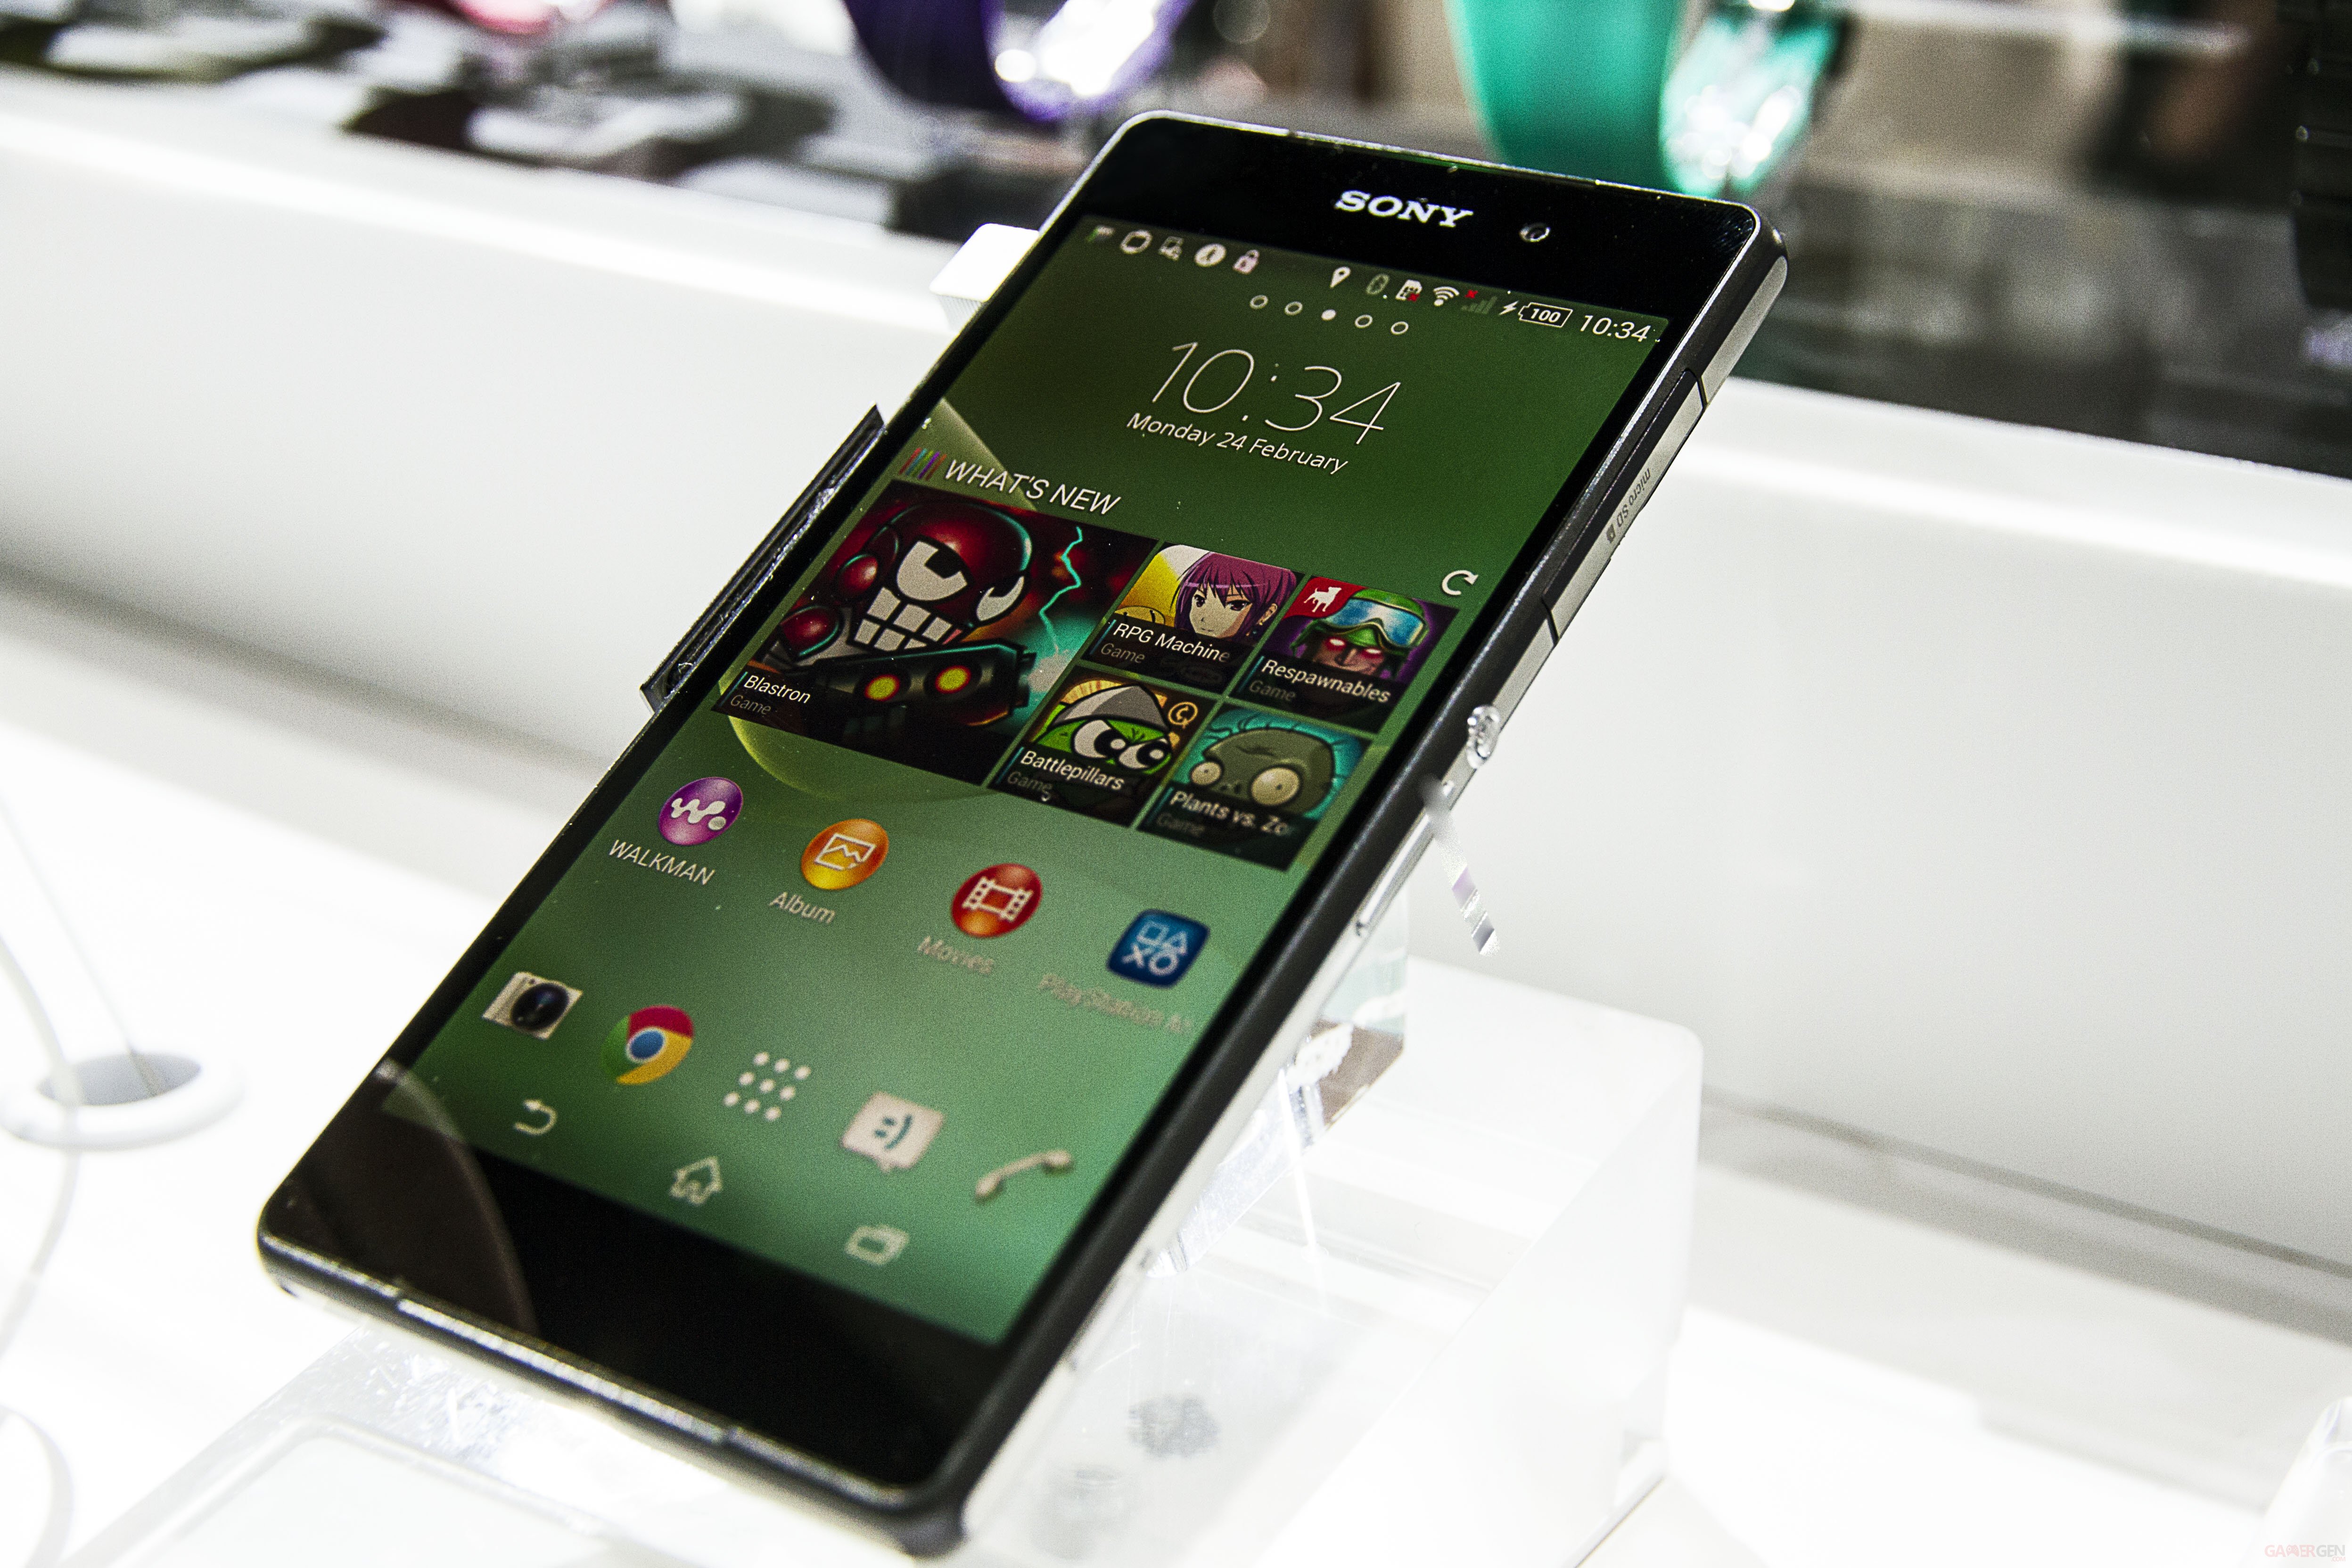 Sony Xperia Z2 hands-on | Android Central